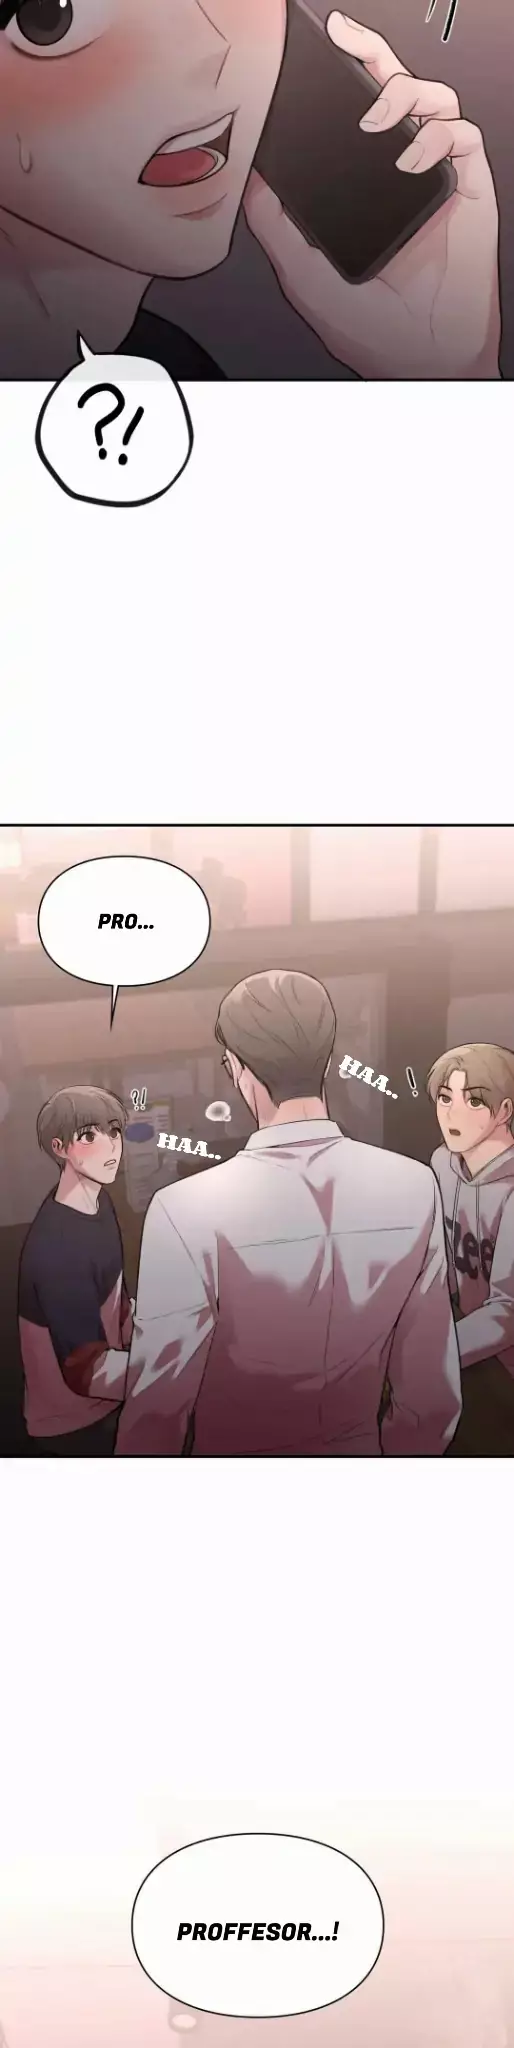 Ideal Type But Kkondae - 4 page 37-2ab66ba7